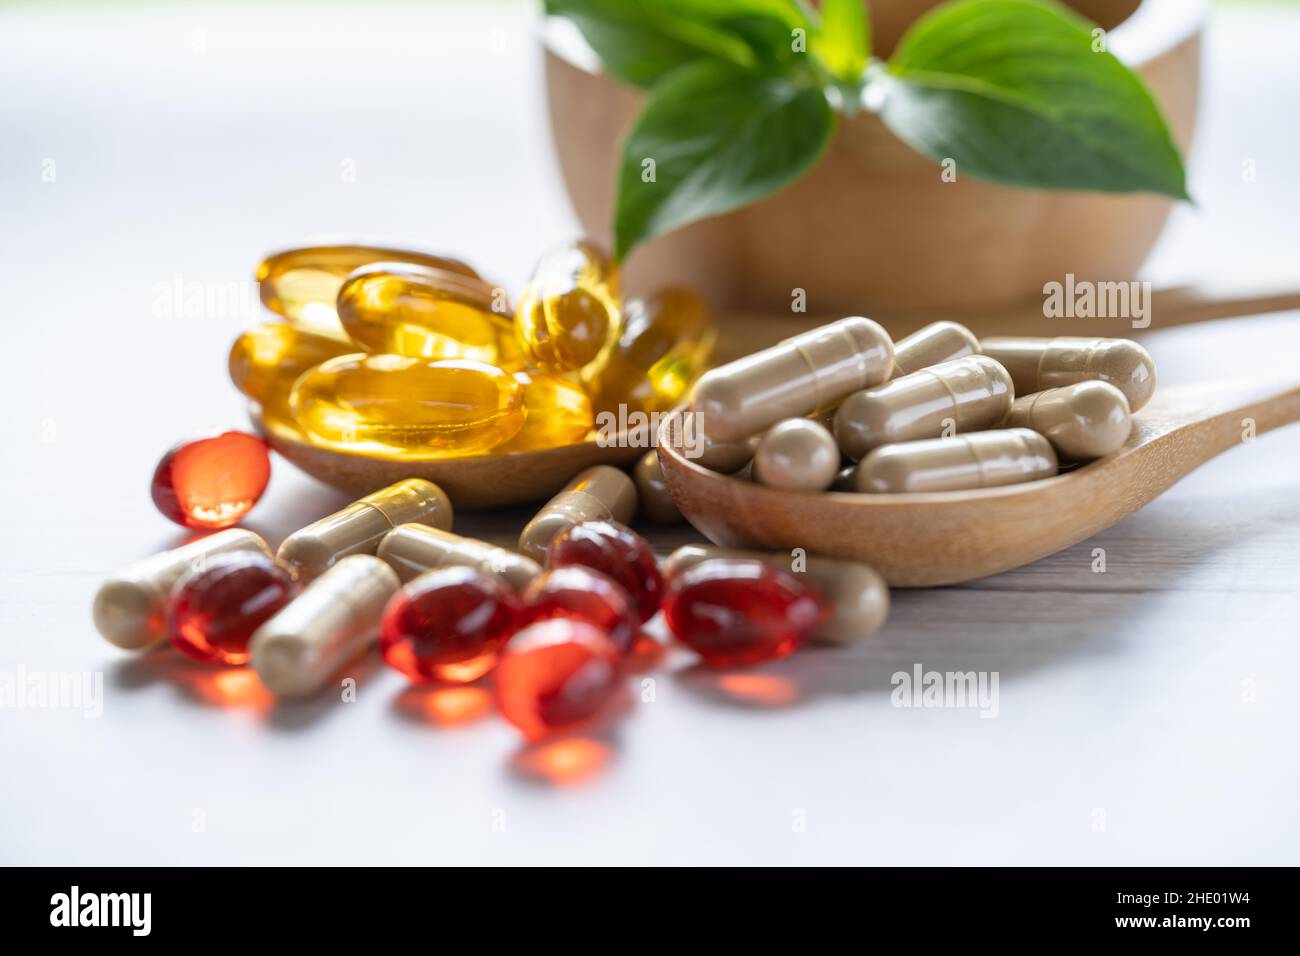 Alternative medicine nature herbal organic capsule, drug with herbs leaf natural supplements for healthy good life. Stock Photo